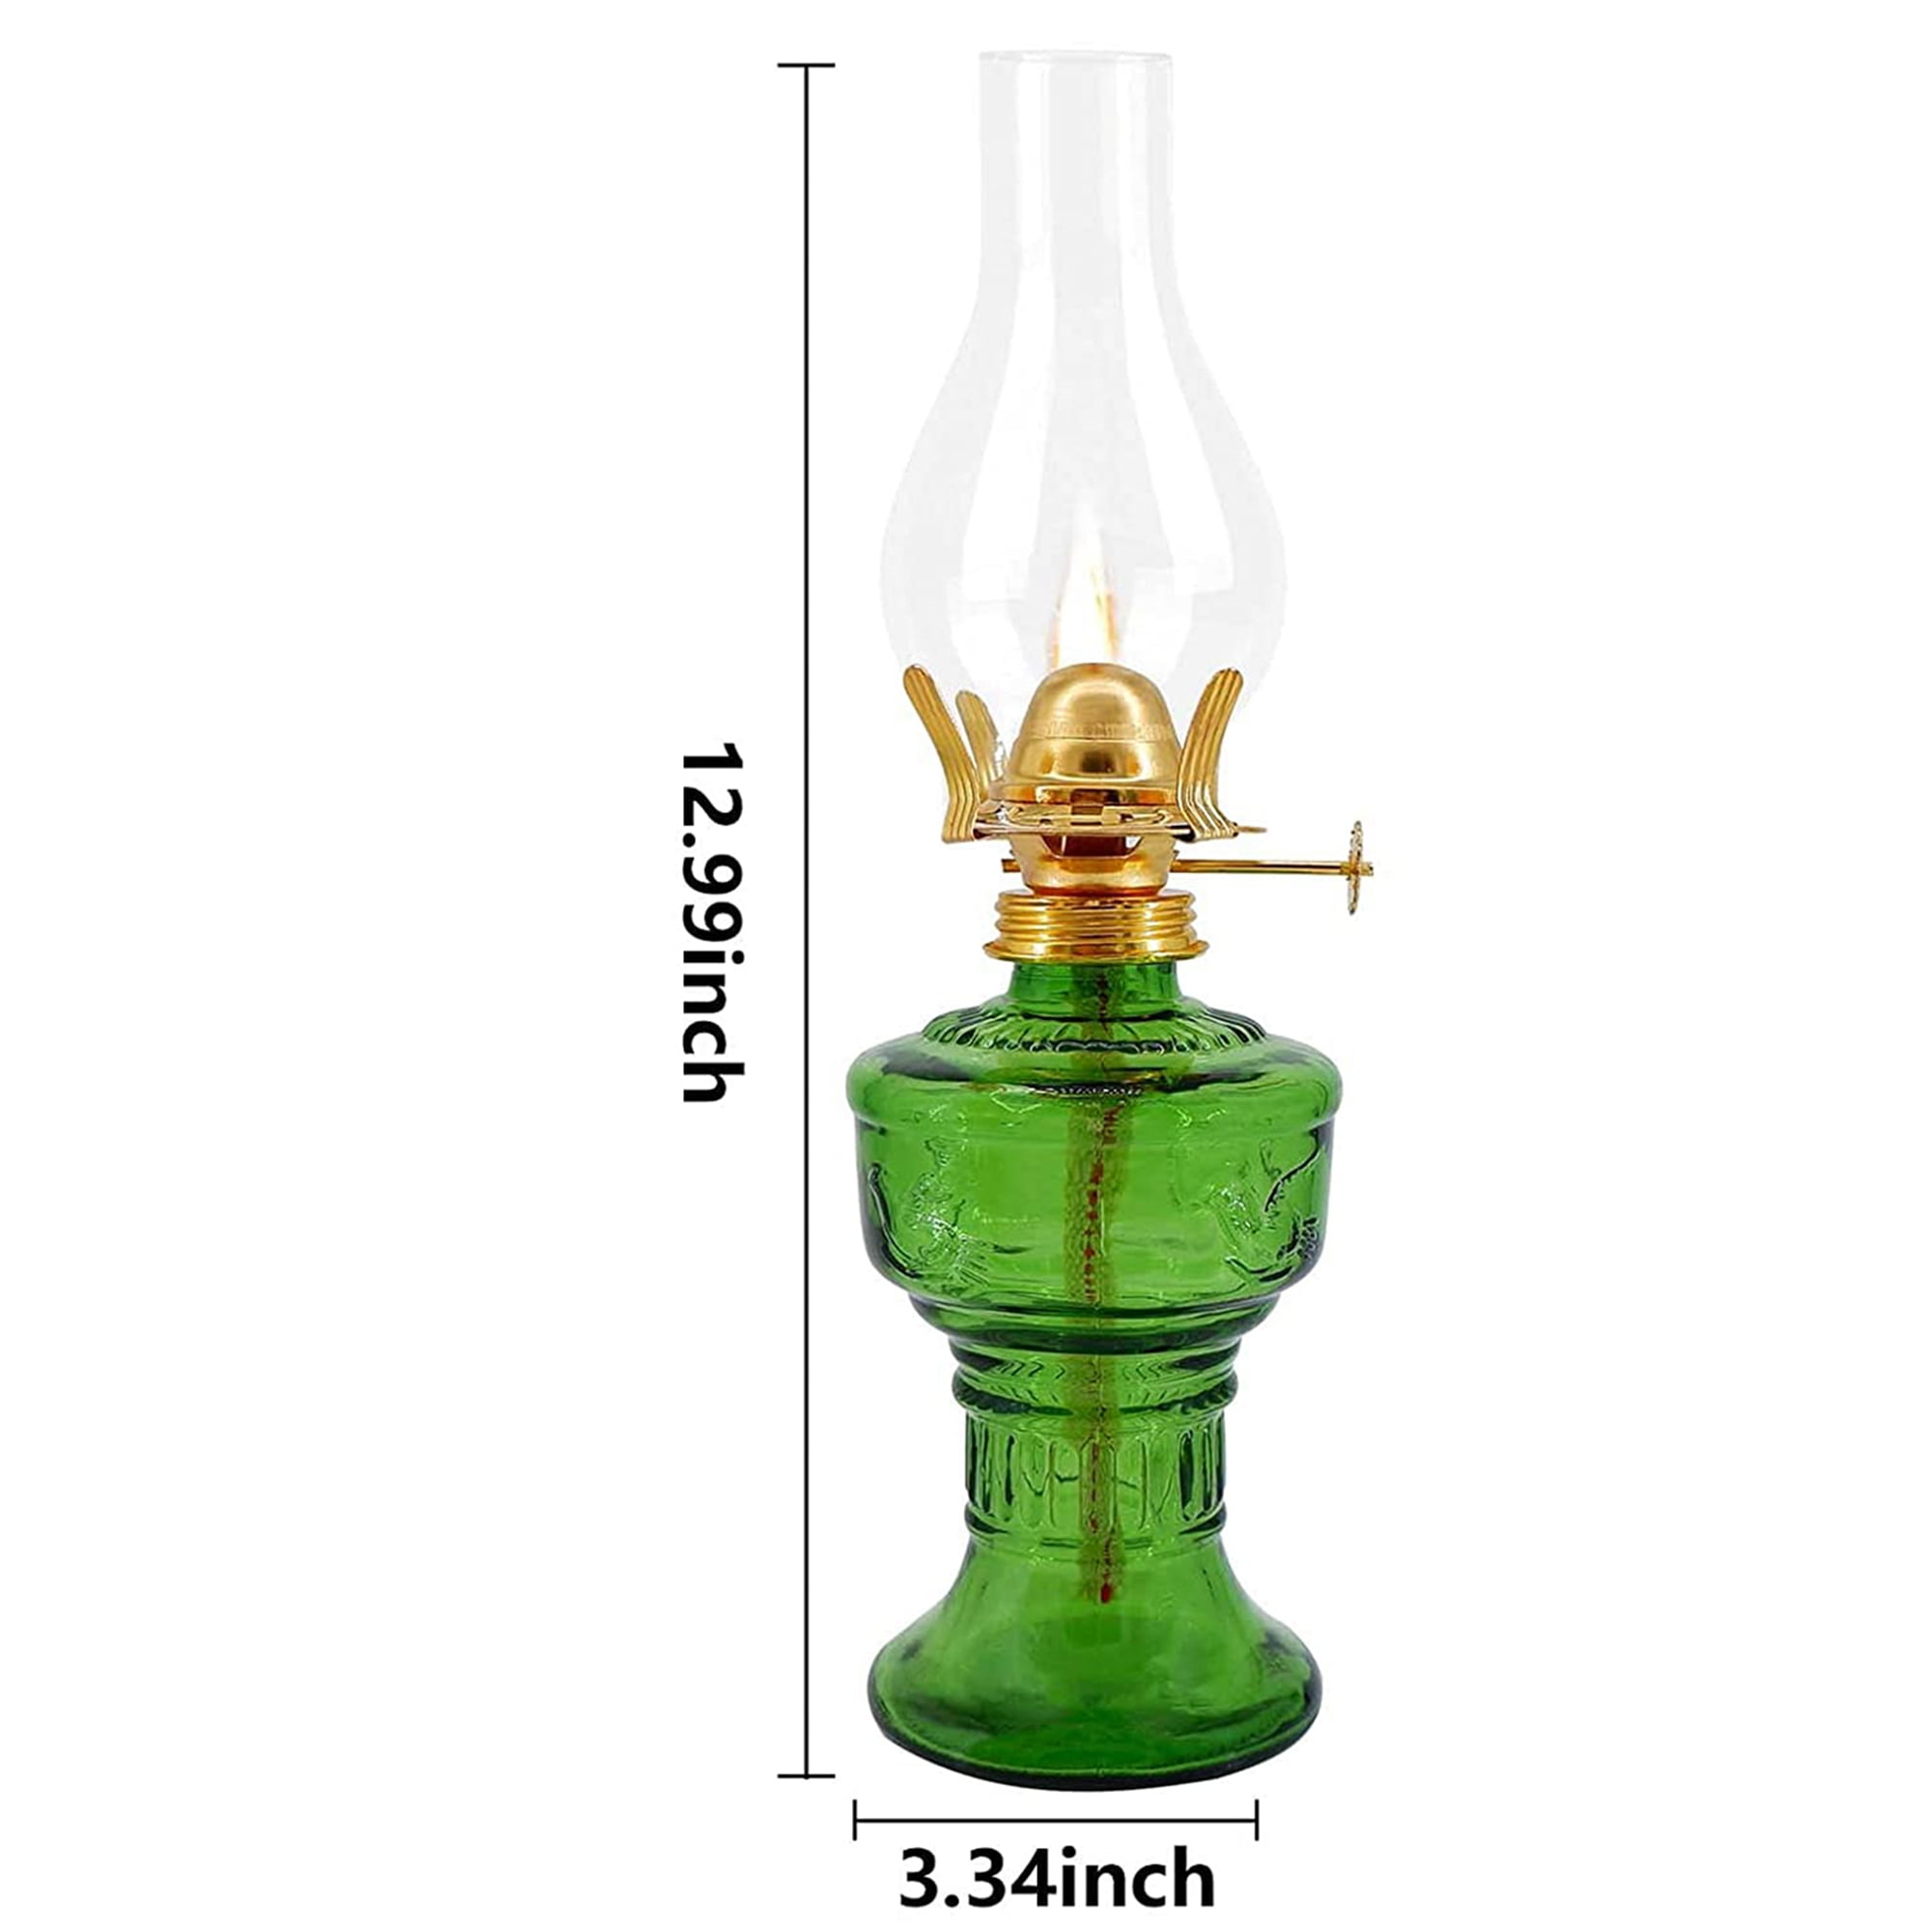 4 Pieces Oil Lamps, Vintage Glass Kerosene Lamp Oil Lantern, Classic  Chamber Hurricane Lamps Decorative Oil Lamp for Indoor Use Home Tabletop  Decor